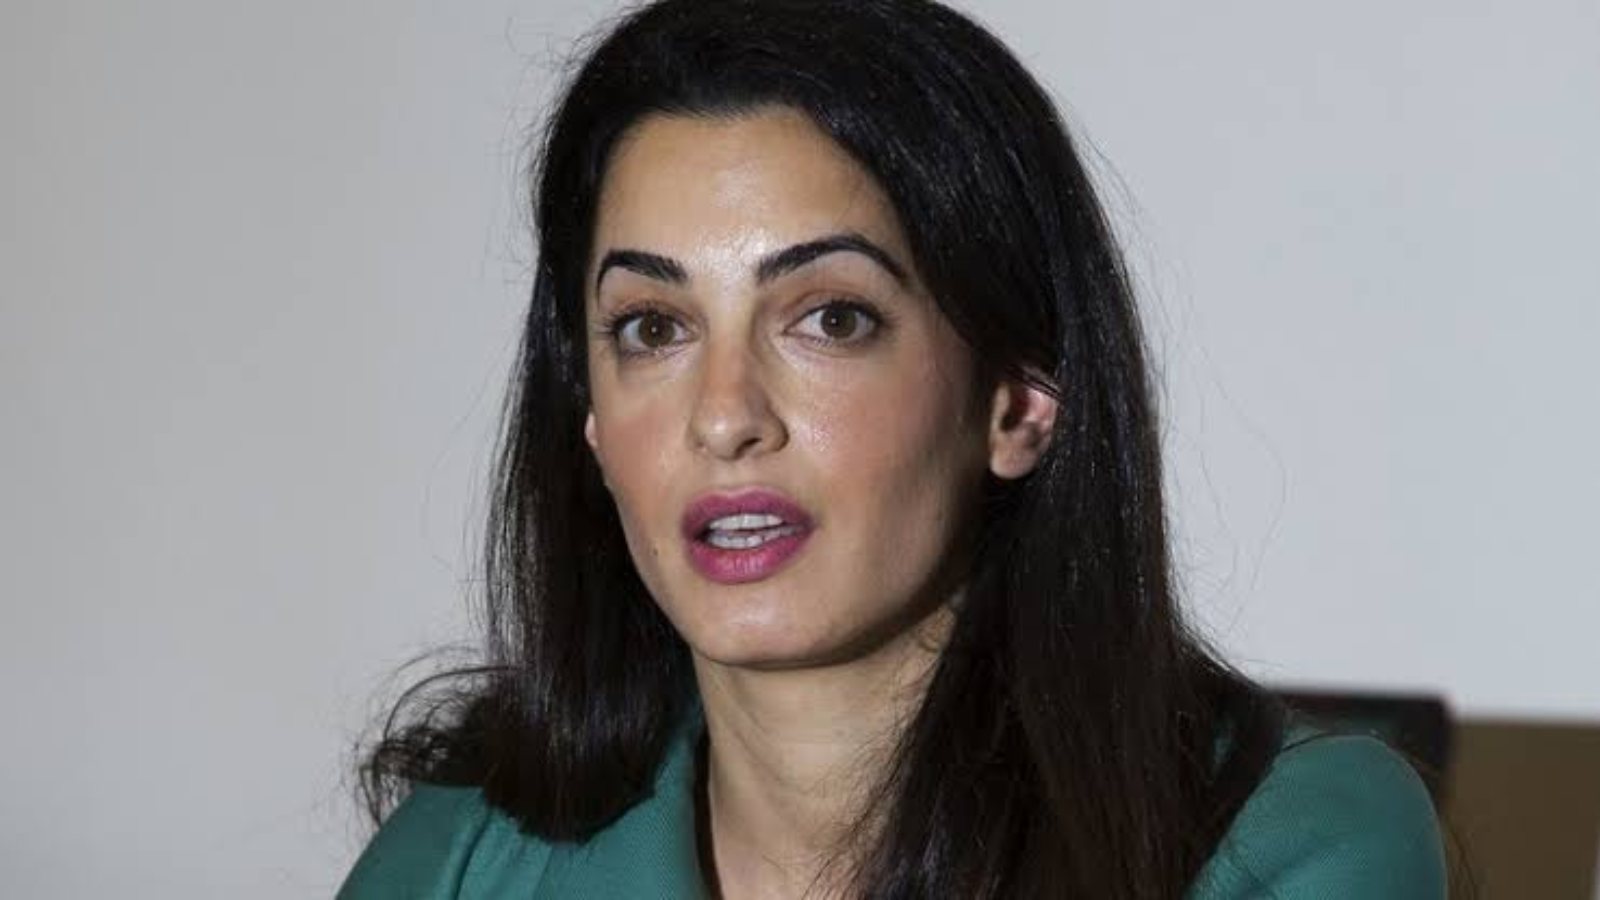 Amal Clooney Plastic Surgery: Has She Had Botox, a Facelift, and Eyelid Surgery?